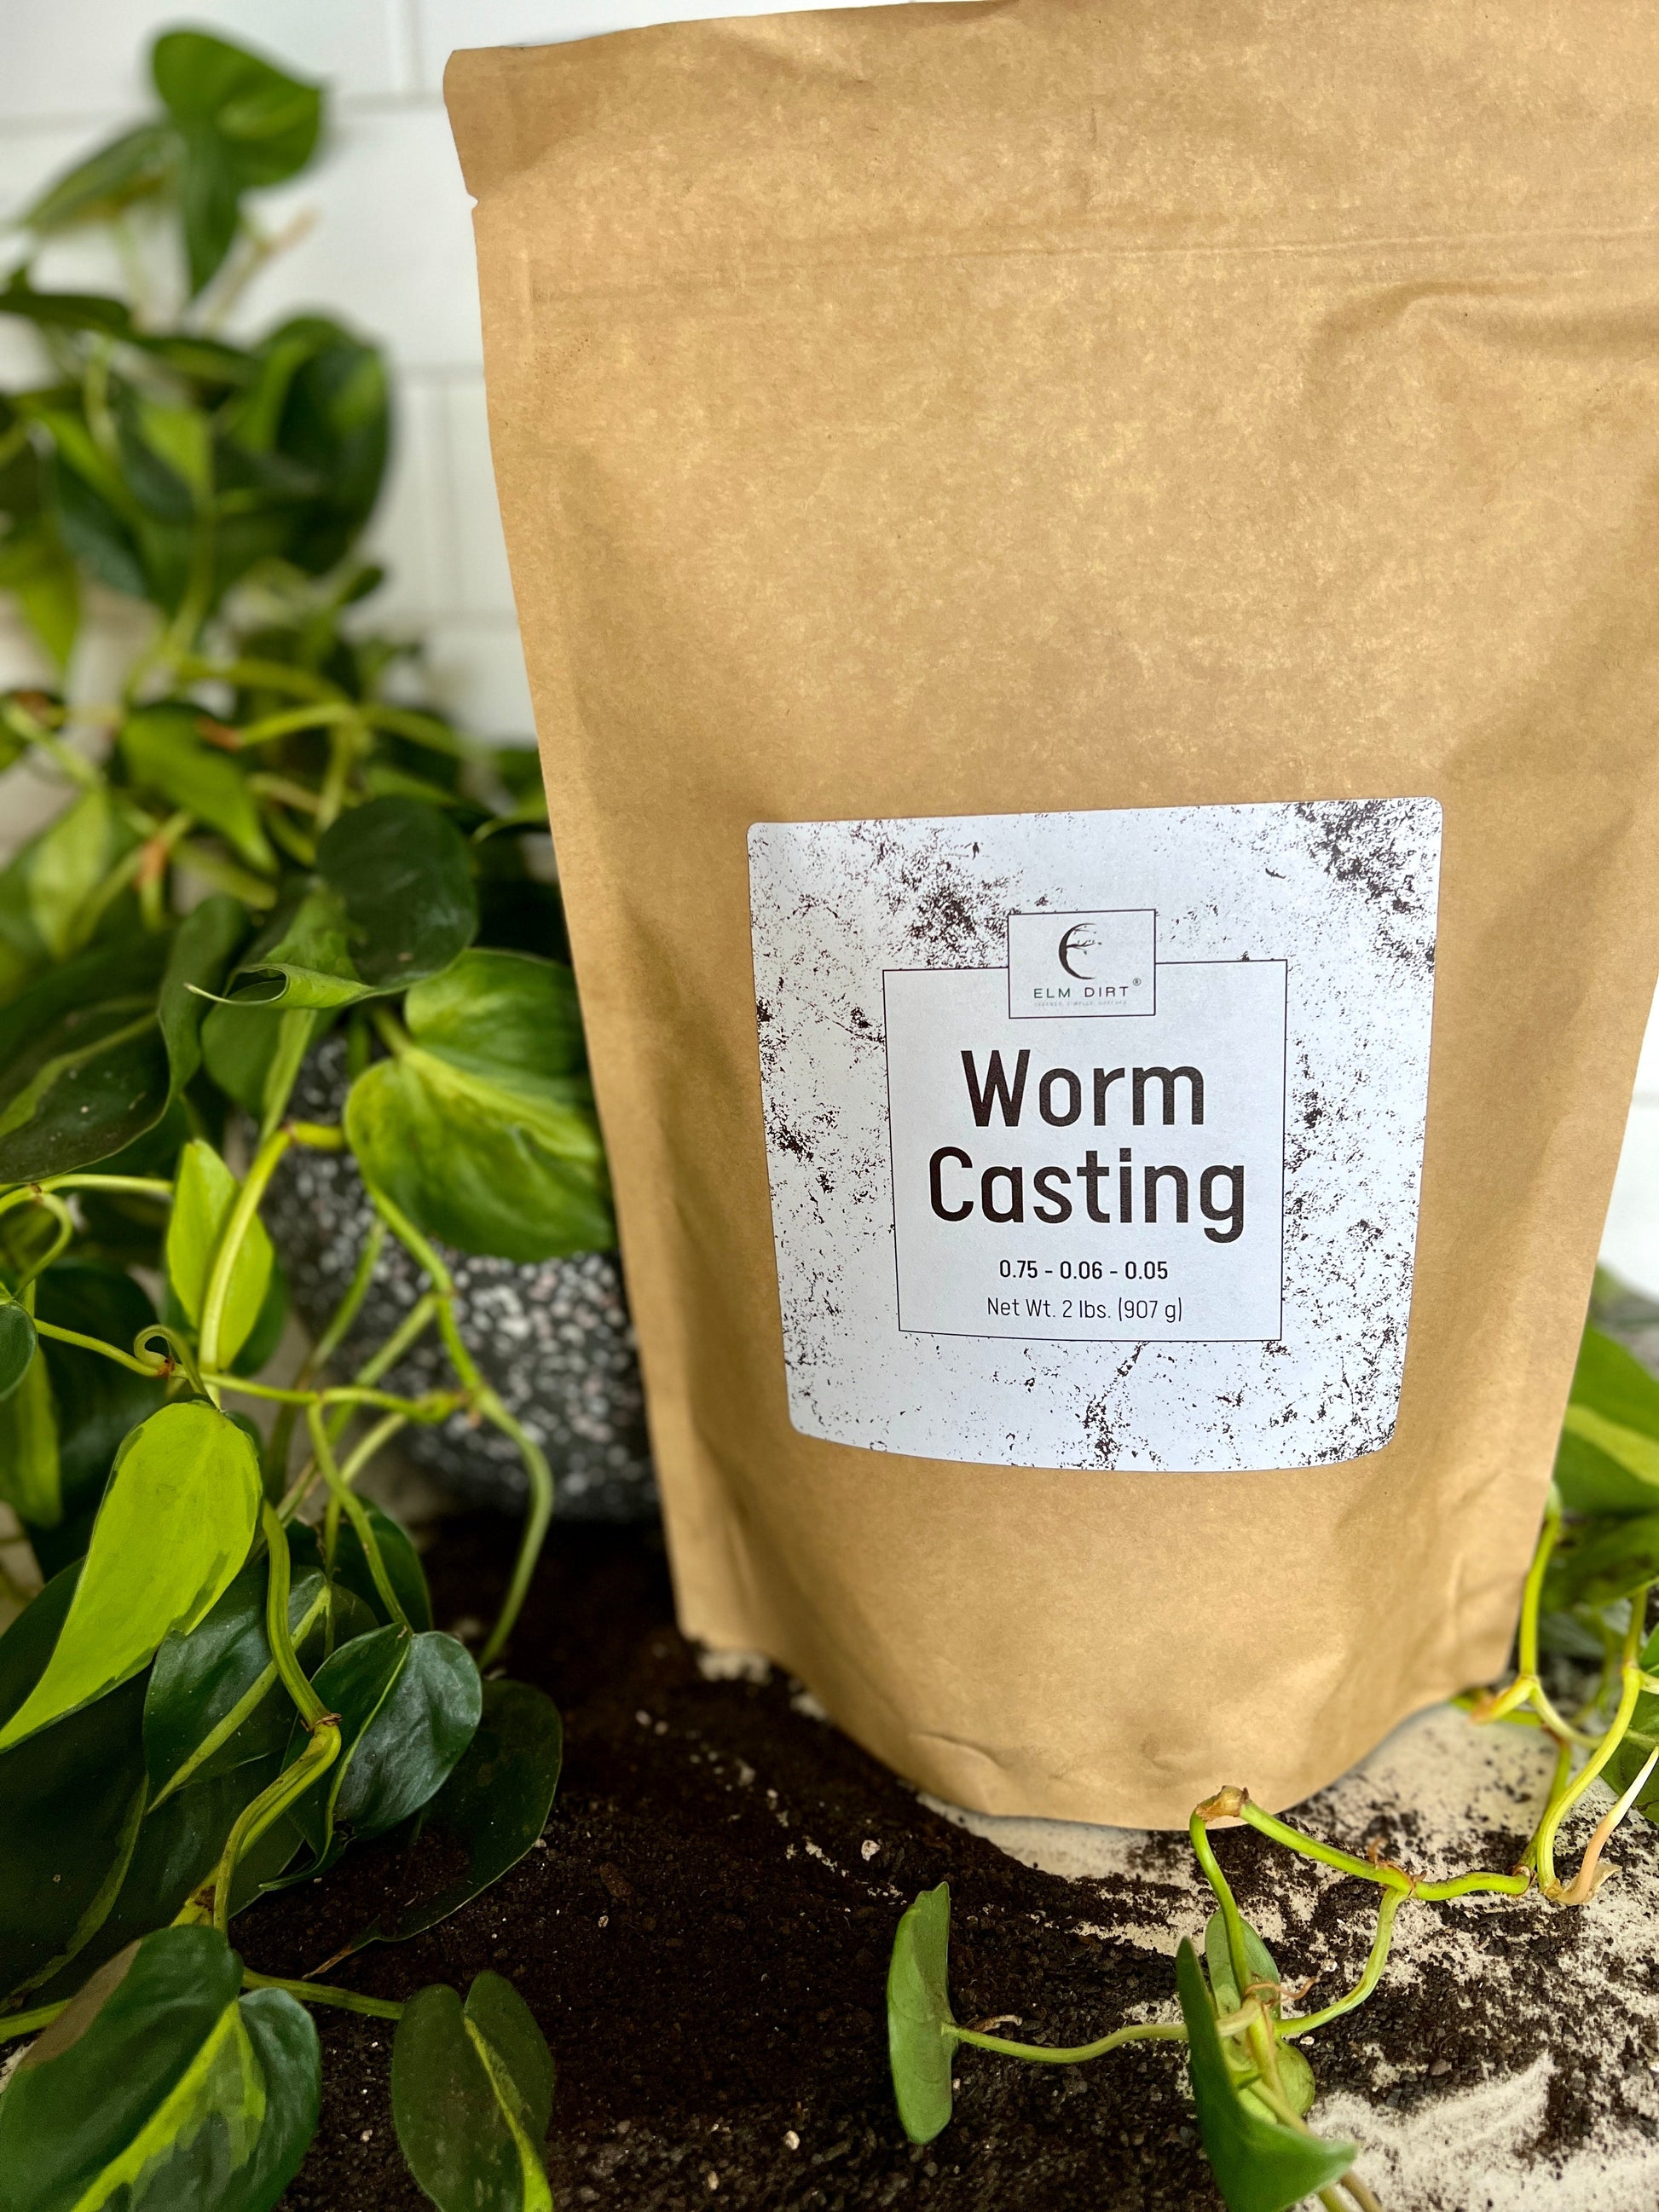 Worm Casting by Elm Dirt - Lotus and Willow